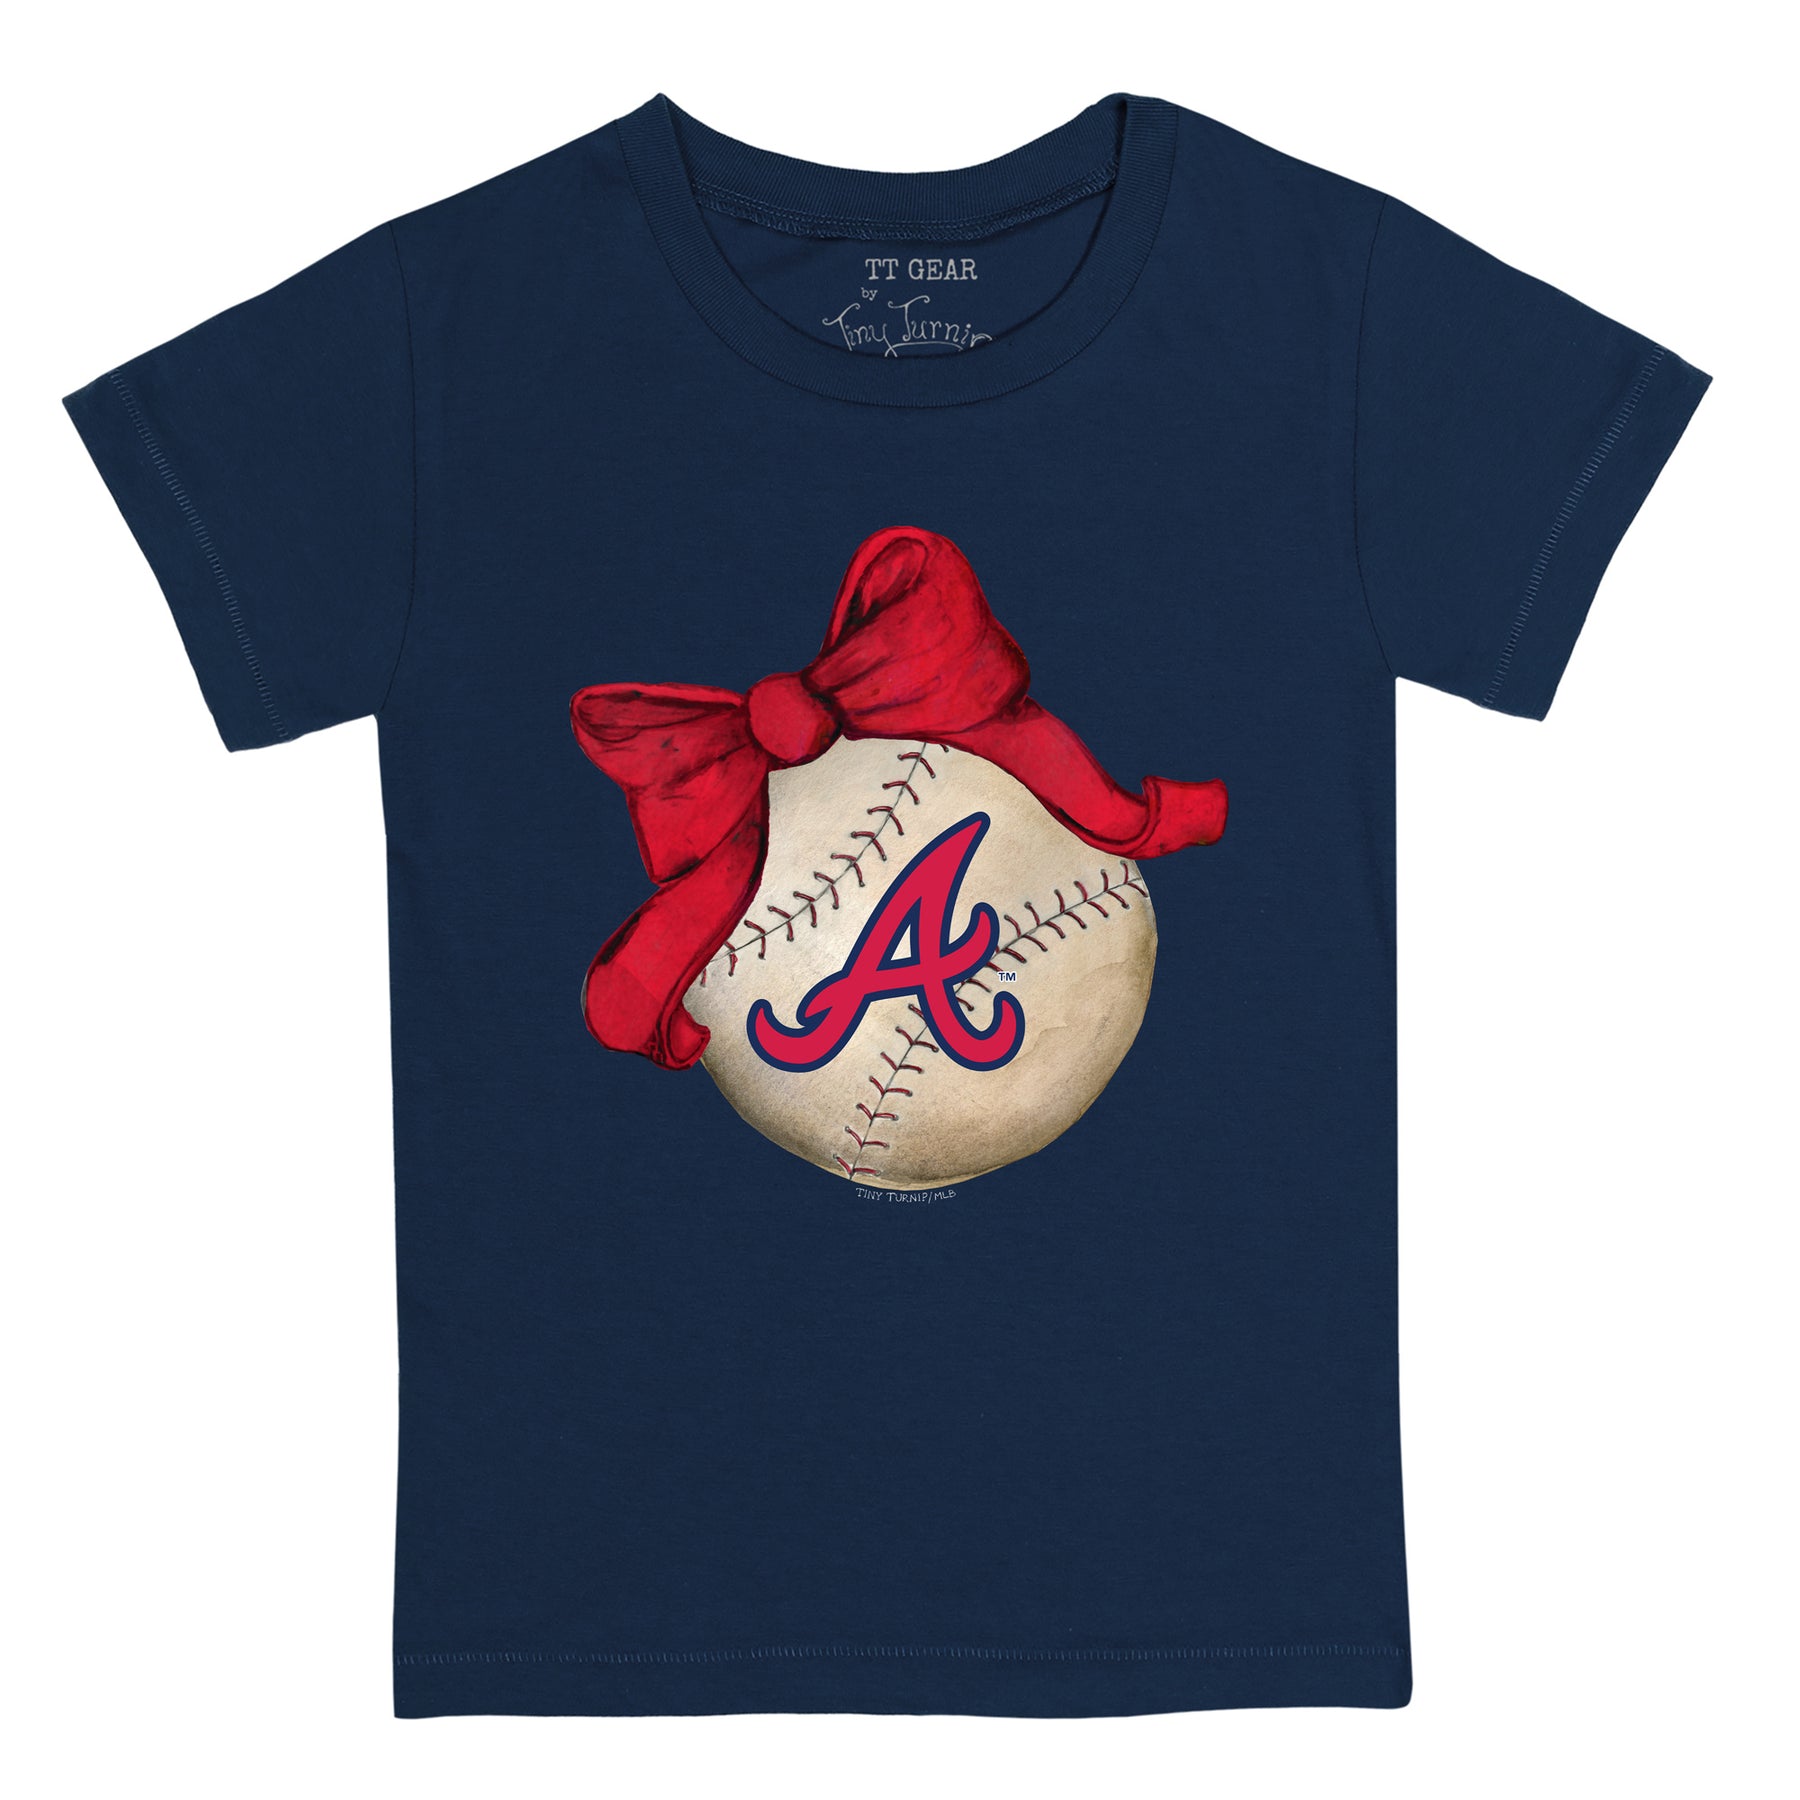 the east is ours braves shirt, Custom prints store